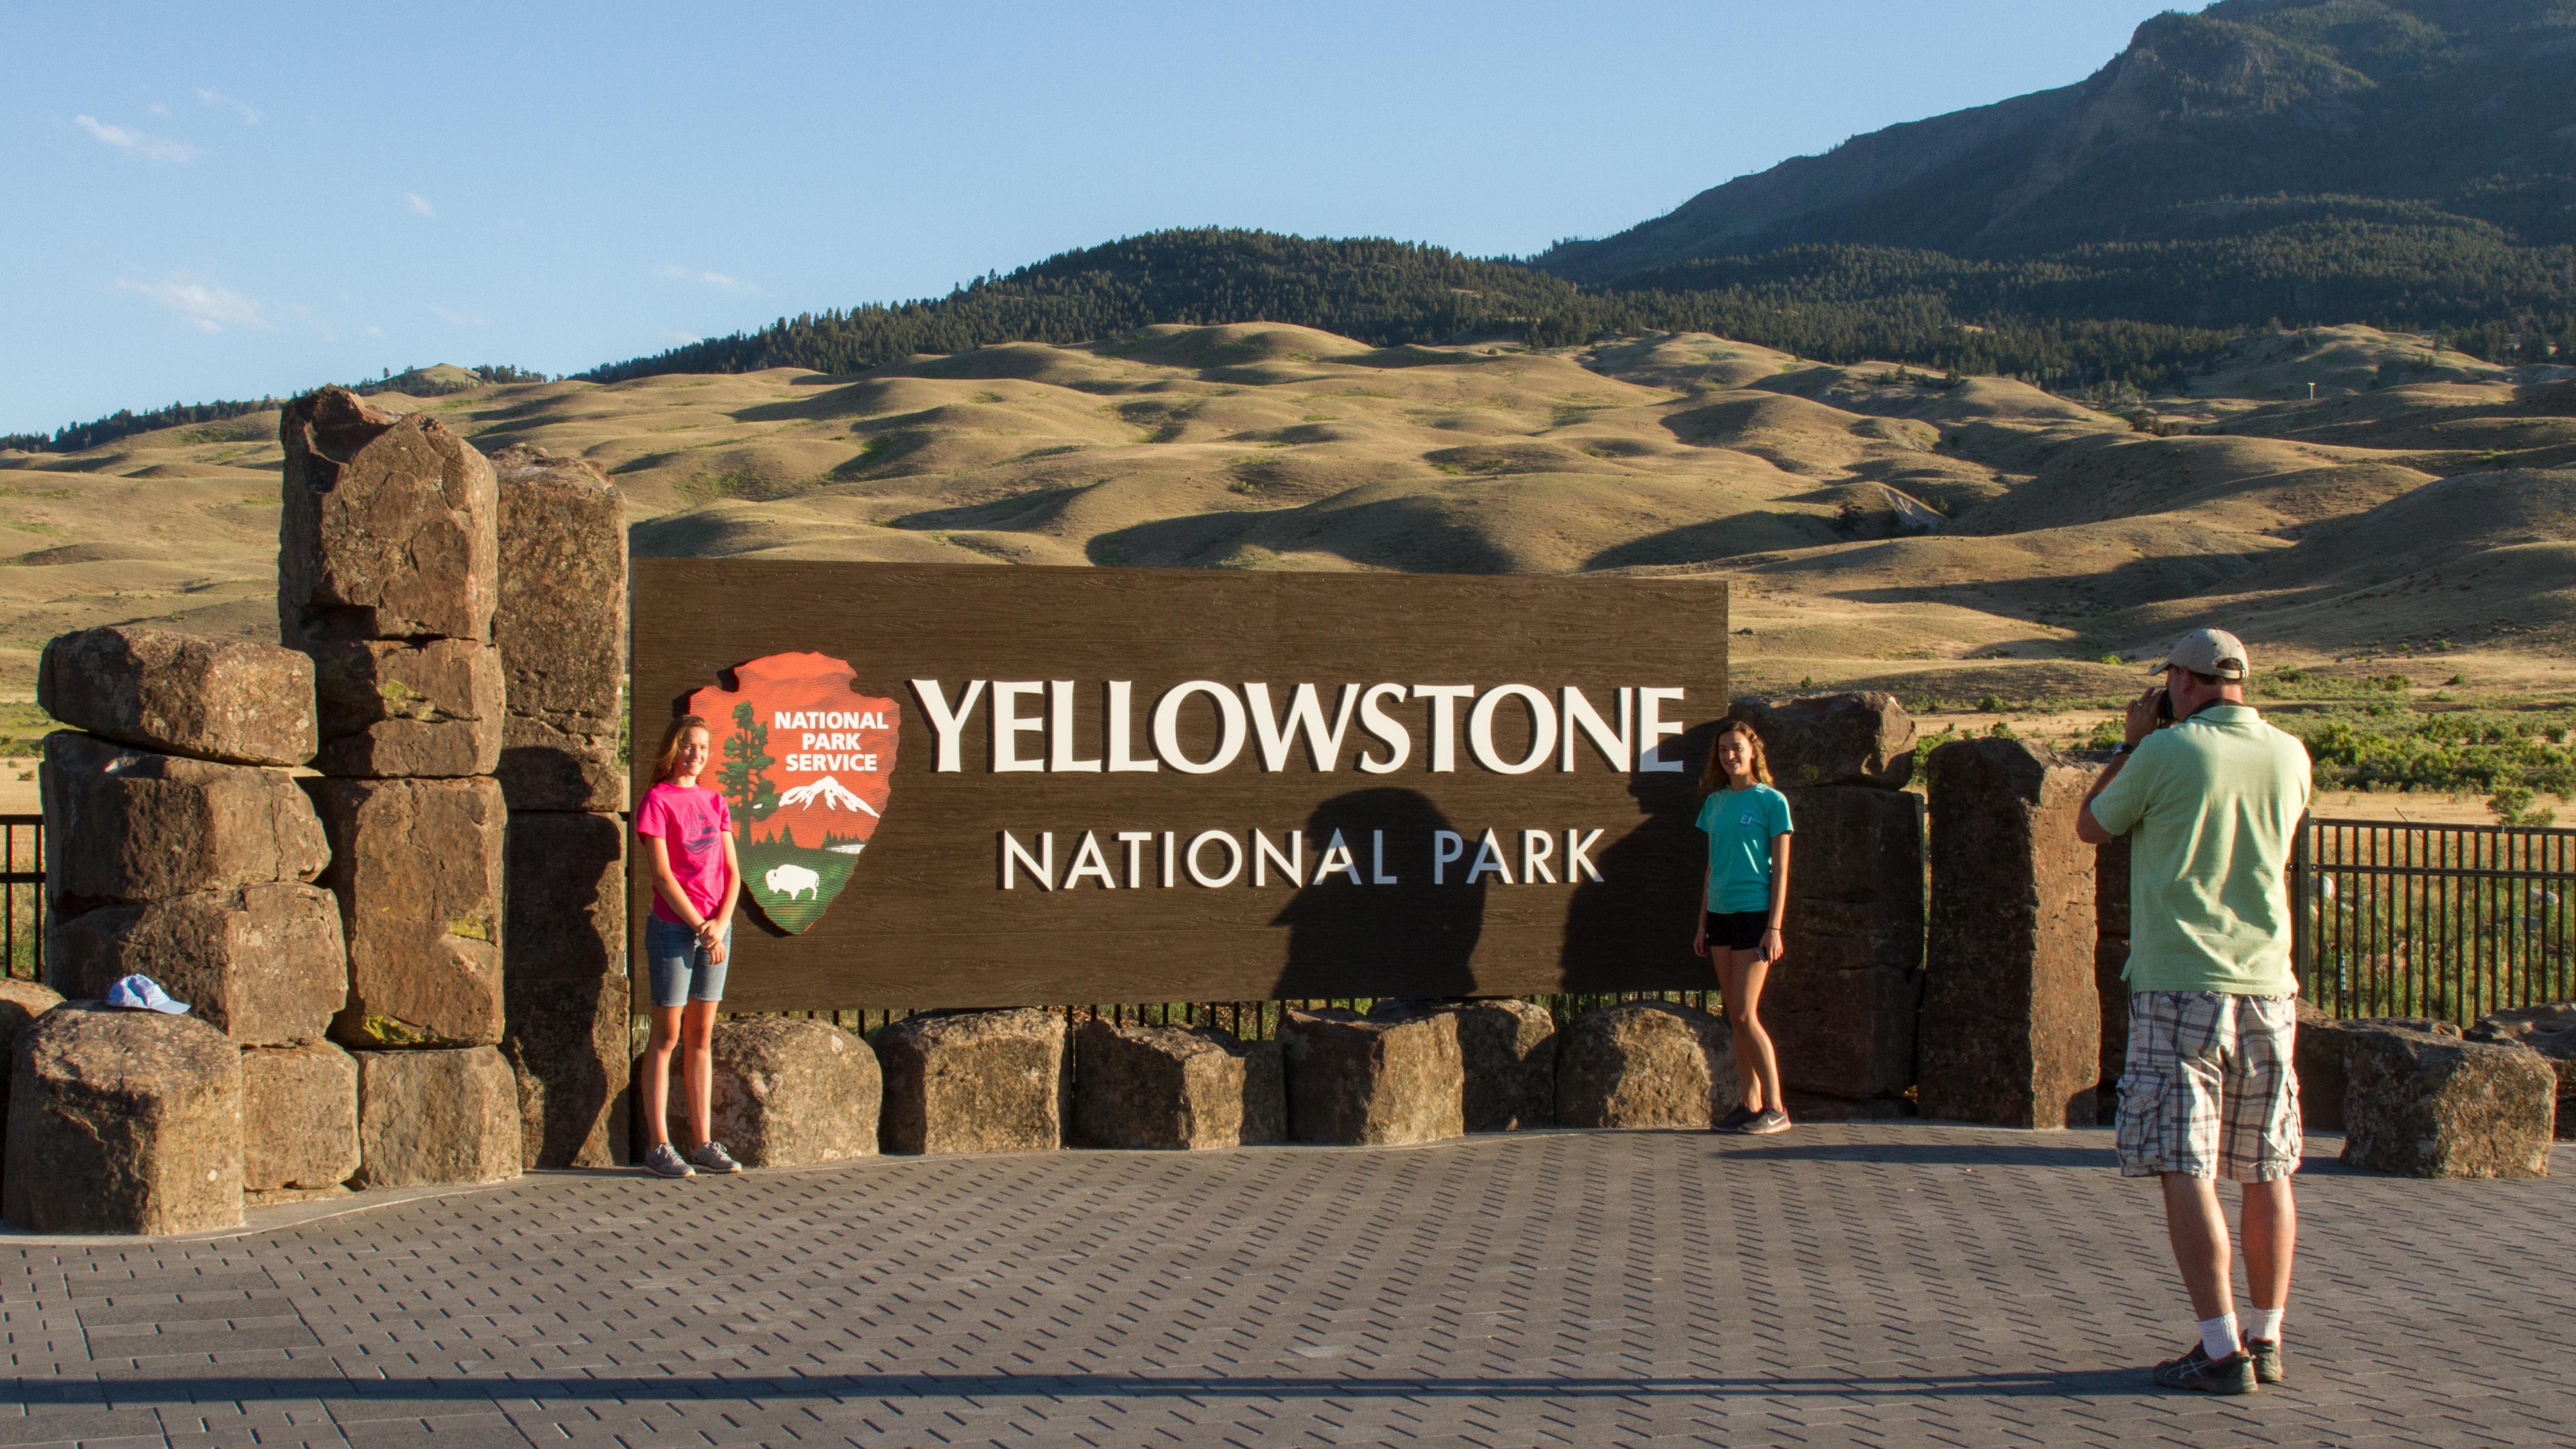 Yellowstone Stone National Park Metal Sign General Store Camping Hiking 